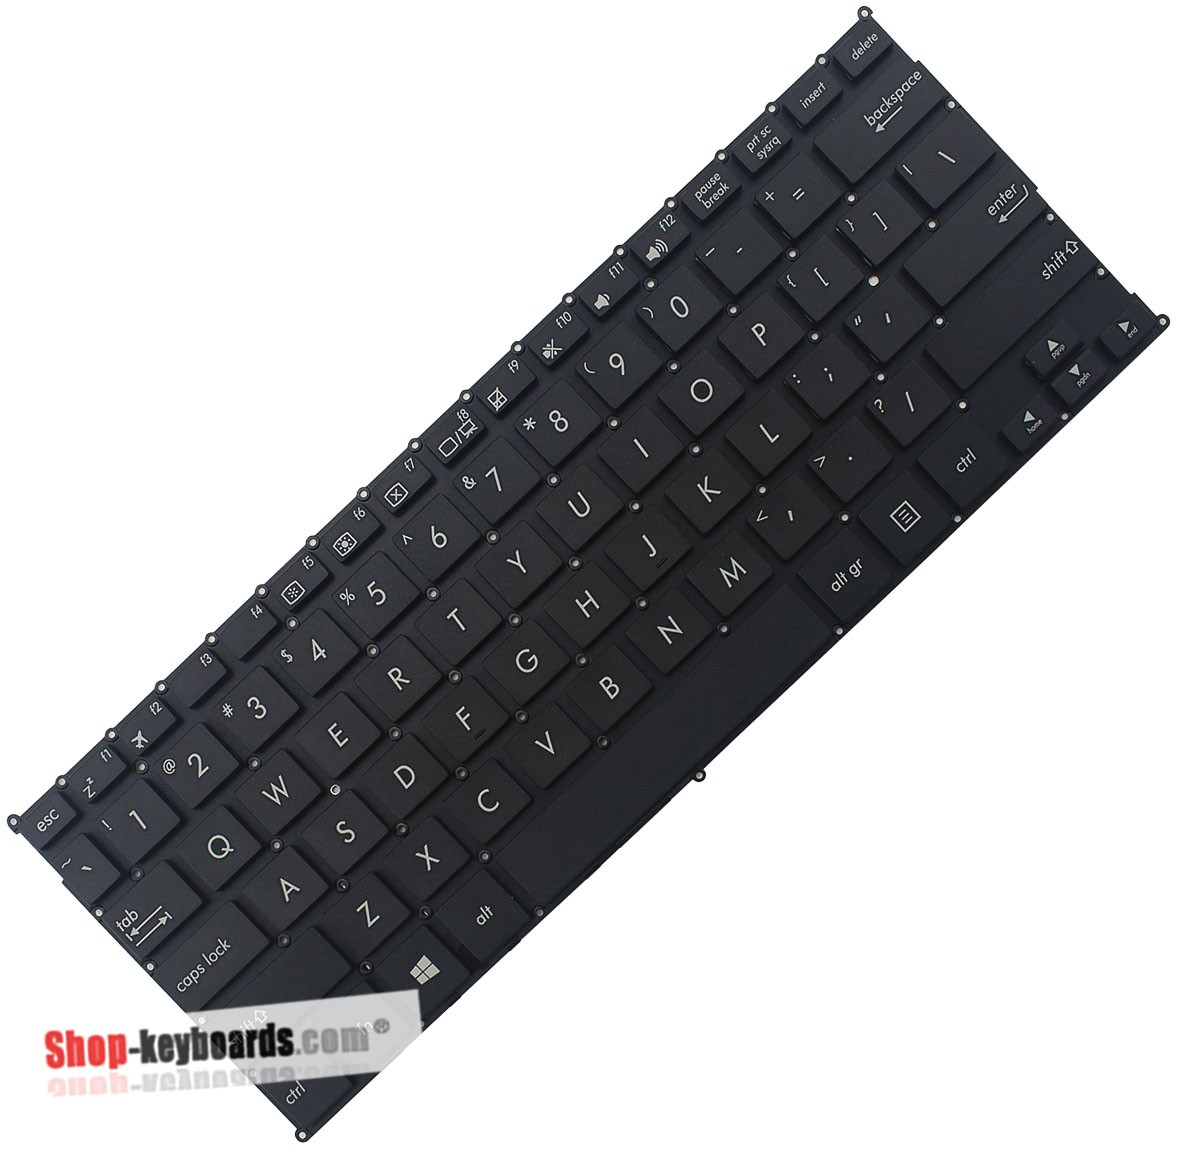 Asus 0KNB0-112DFR00 Keyboard replacement